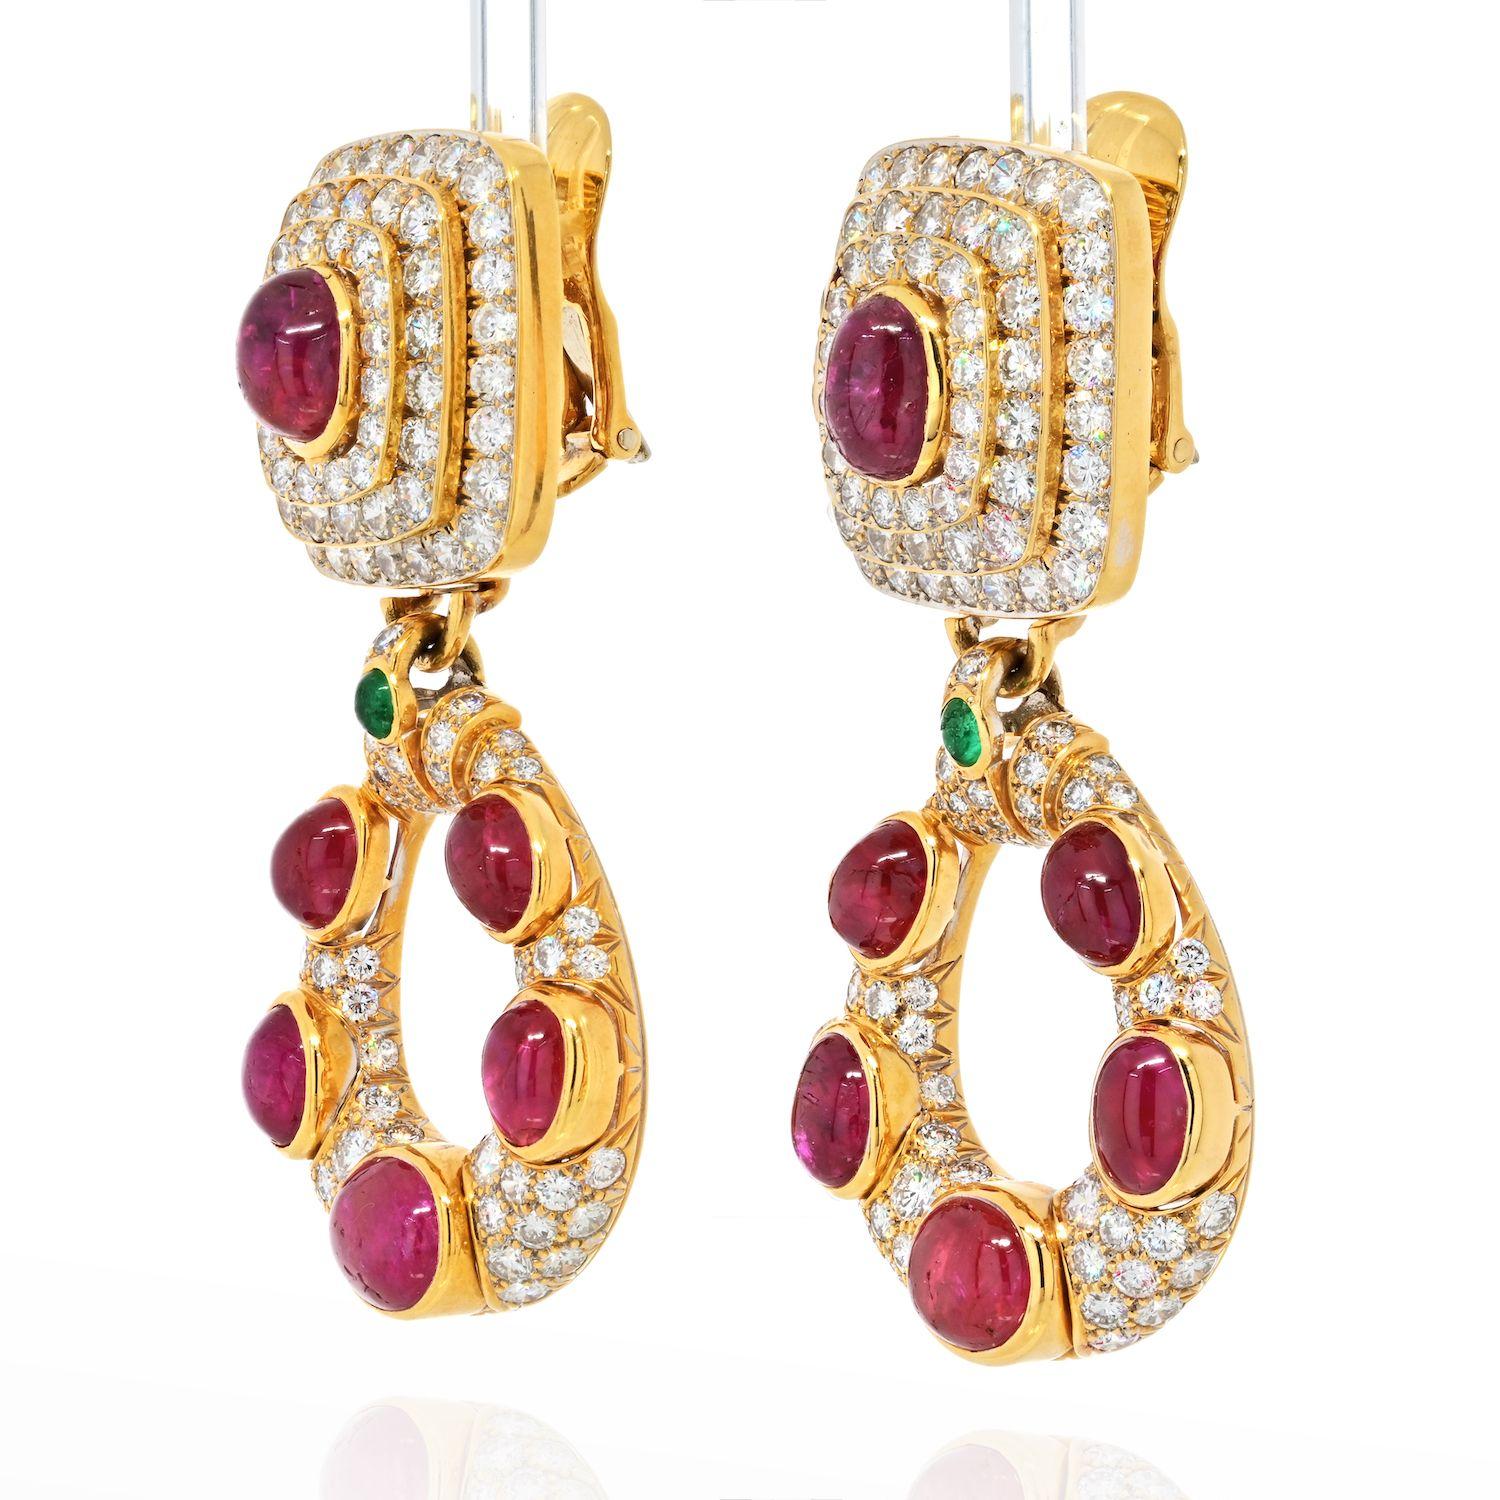 David Webb Diamond and Ruby Door Knocker Earrings.

These beautiful David Webb door knocker earrings are crafted in 18k yellow gold and platinum and feature beautiful deep-color cabochon rubies and round diamonds. 

Each earring can be worn as day